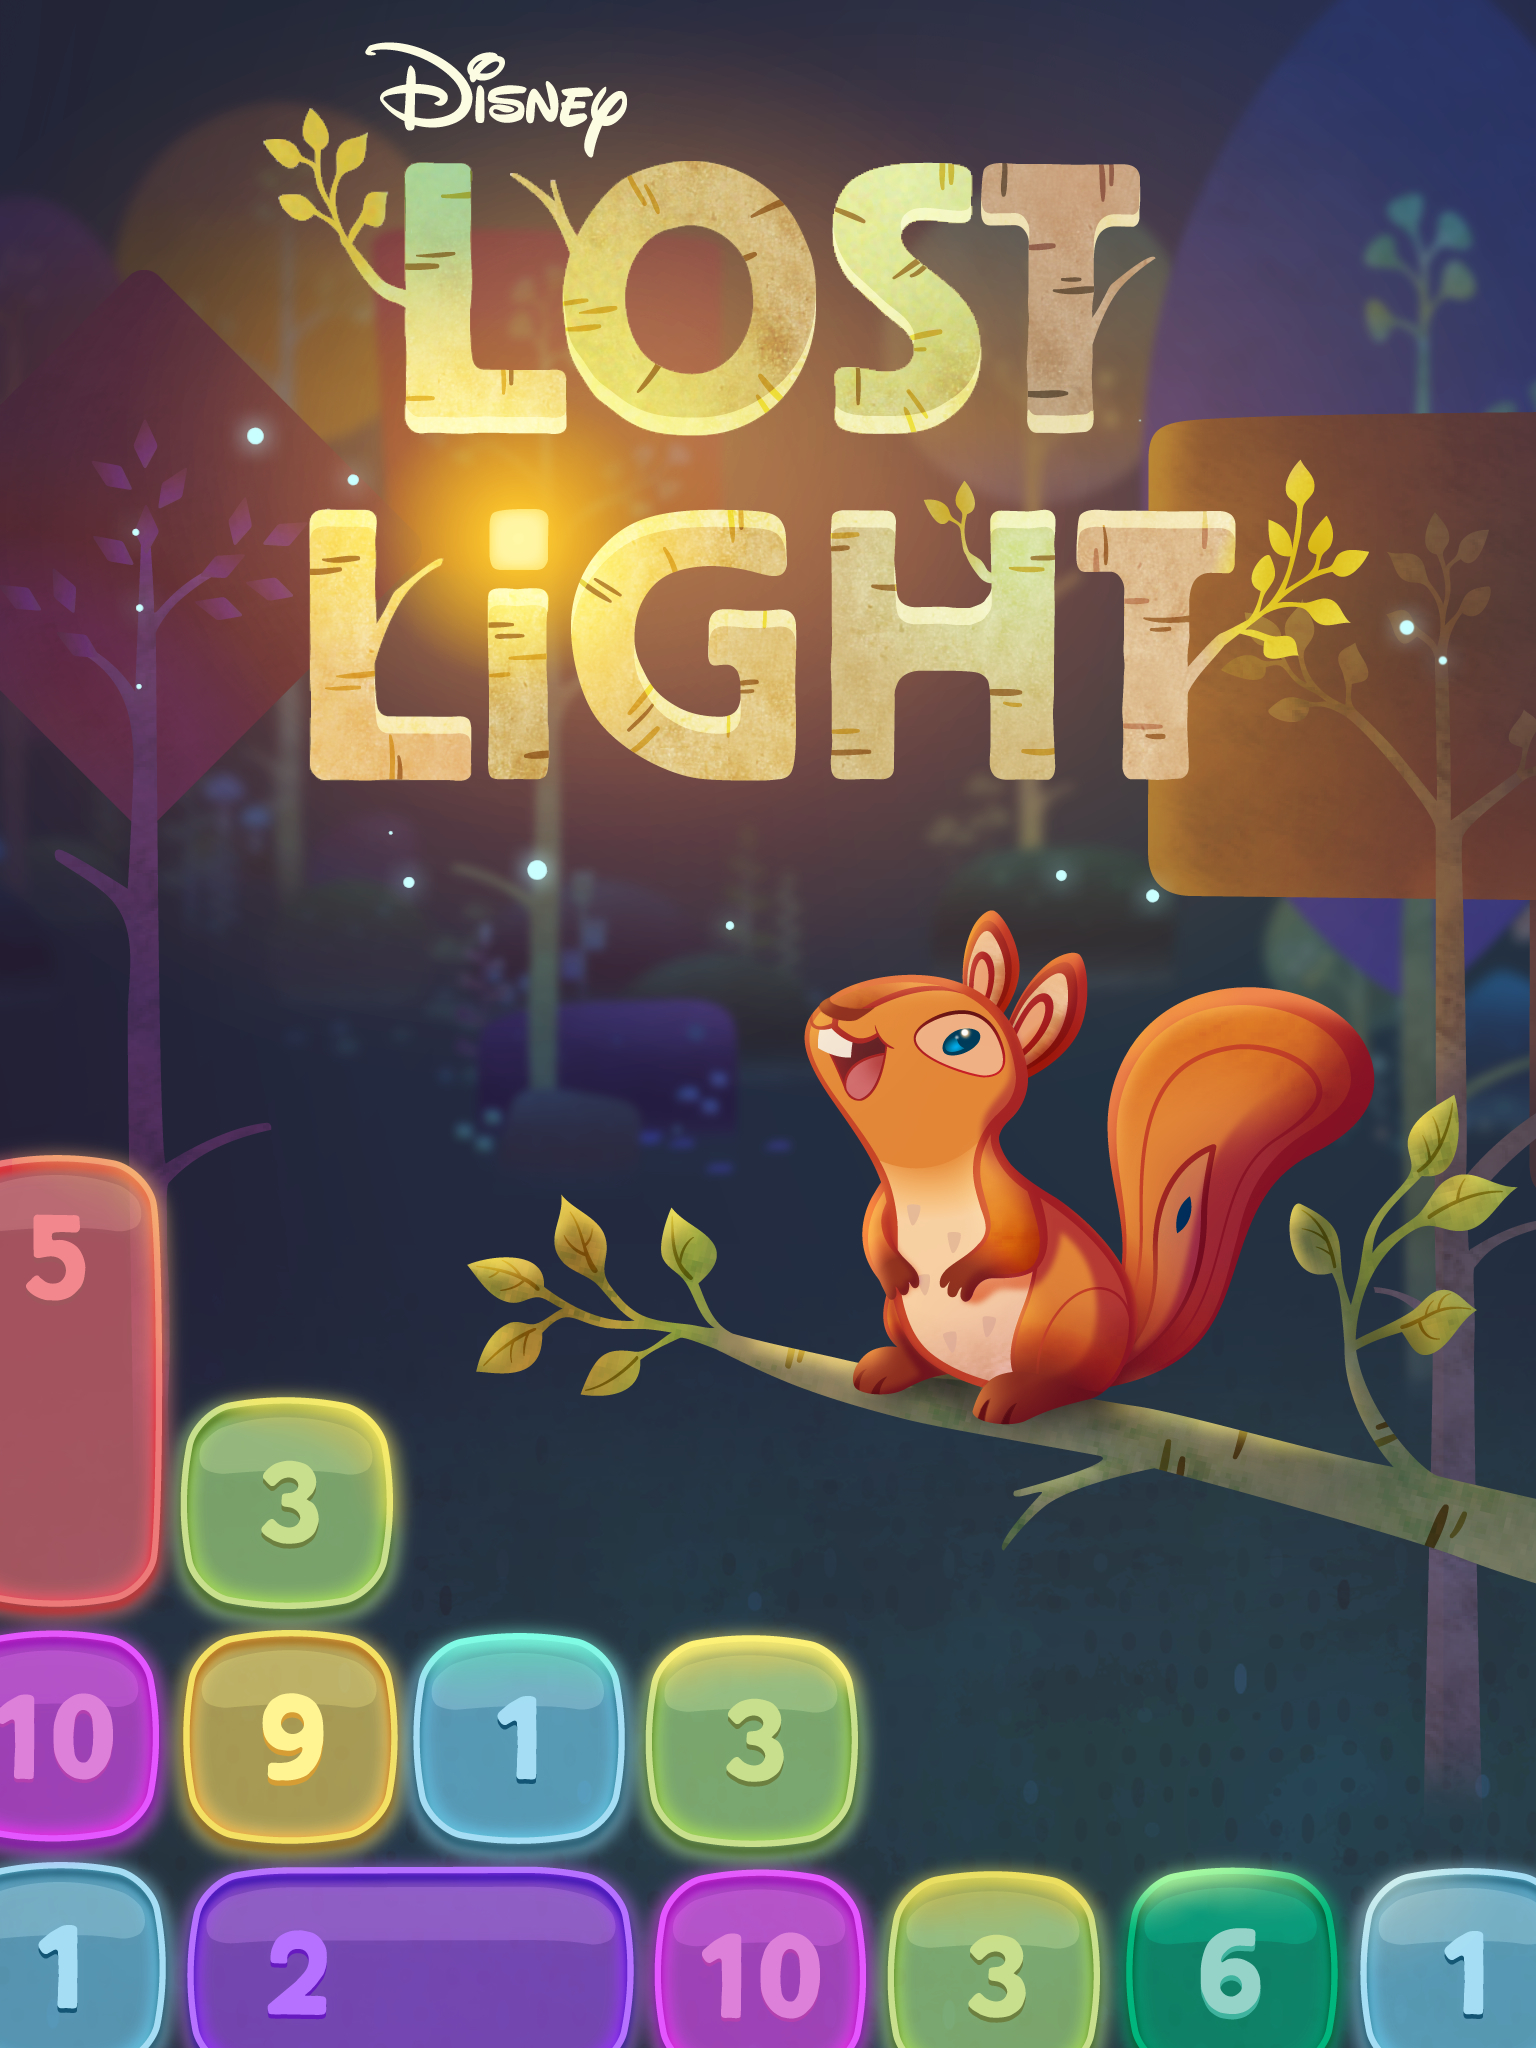 Brighten the Night with Disney’s New Puzzle Adventure Mobile Game “Lost Light”